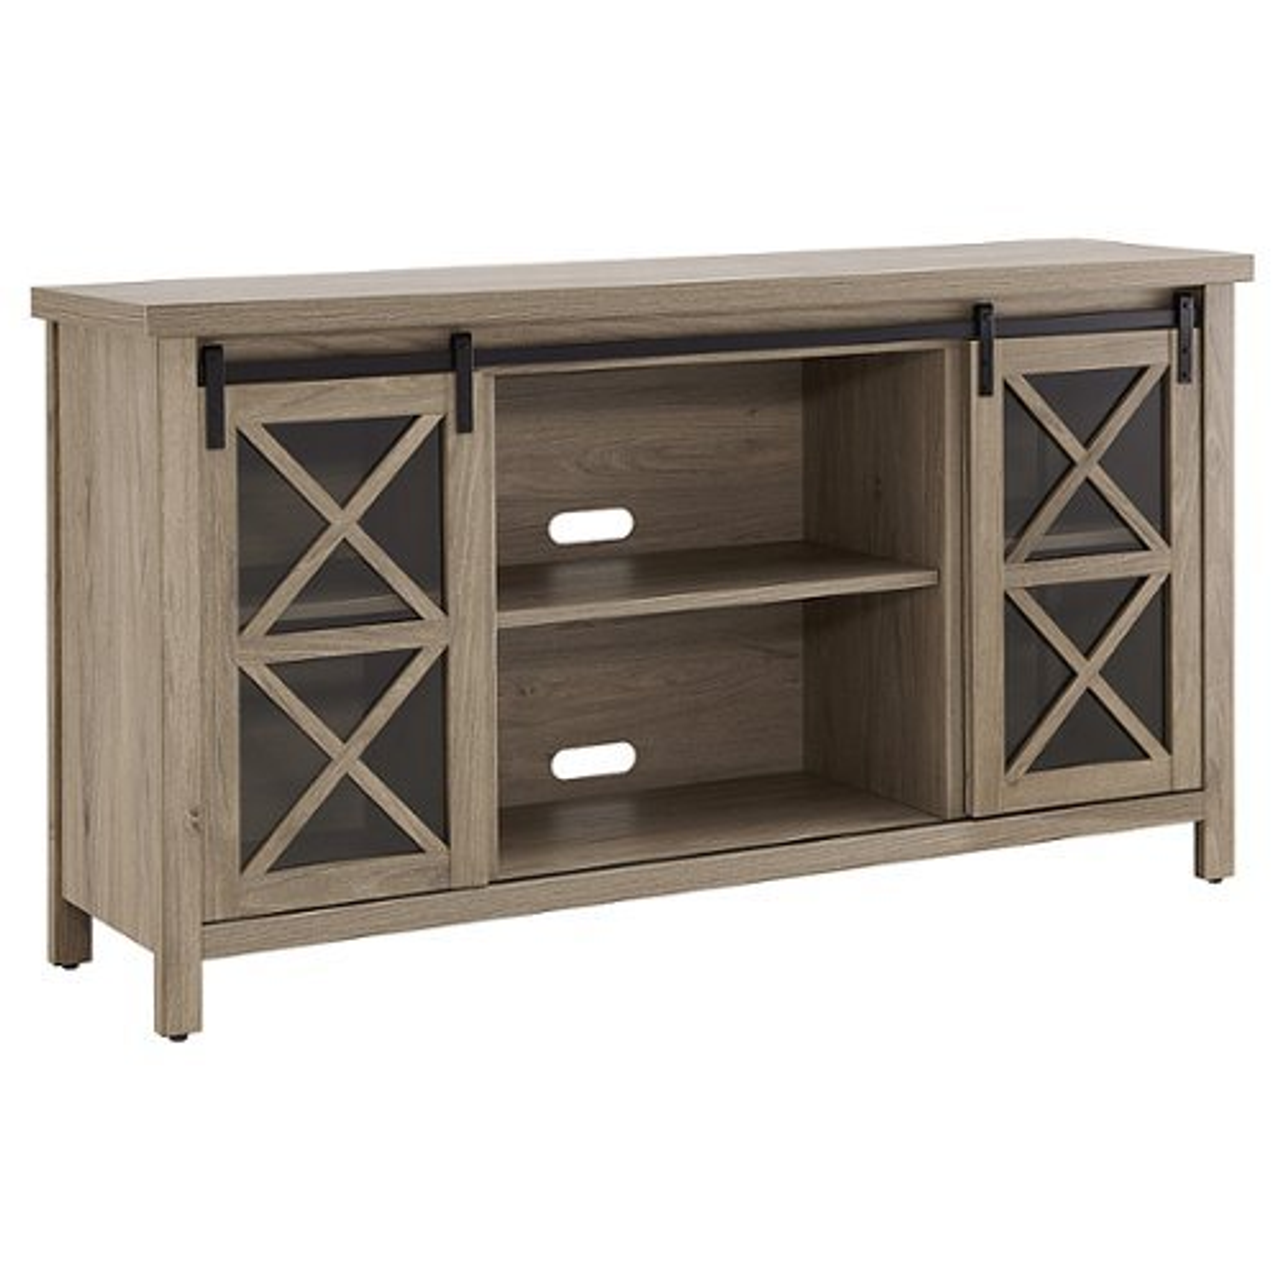 Camden&Wells - Clementine TV Stand for TVs up to 65" - Antiqued Gray Oak